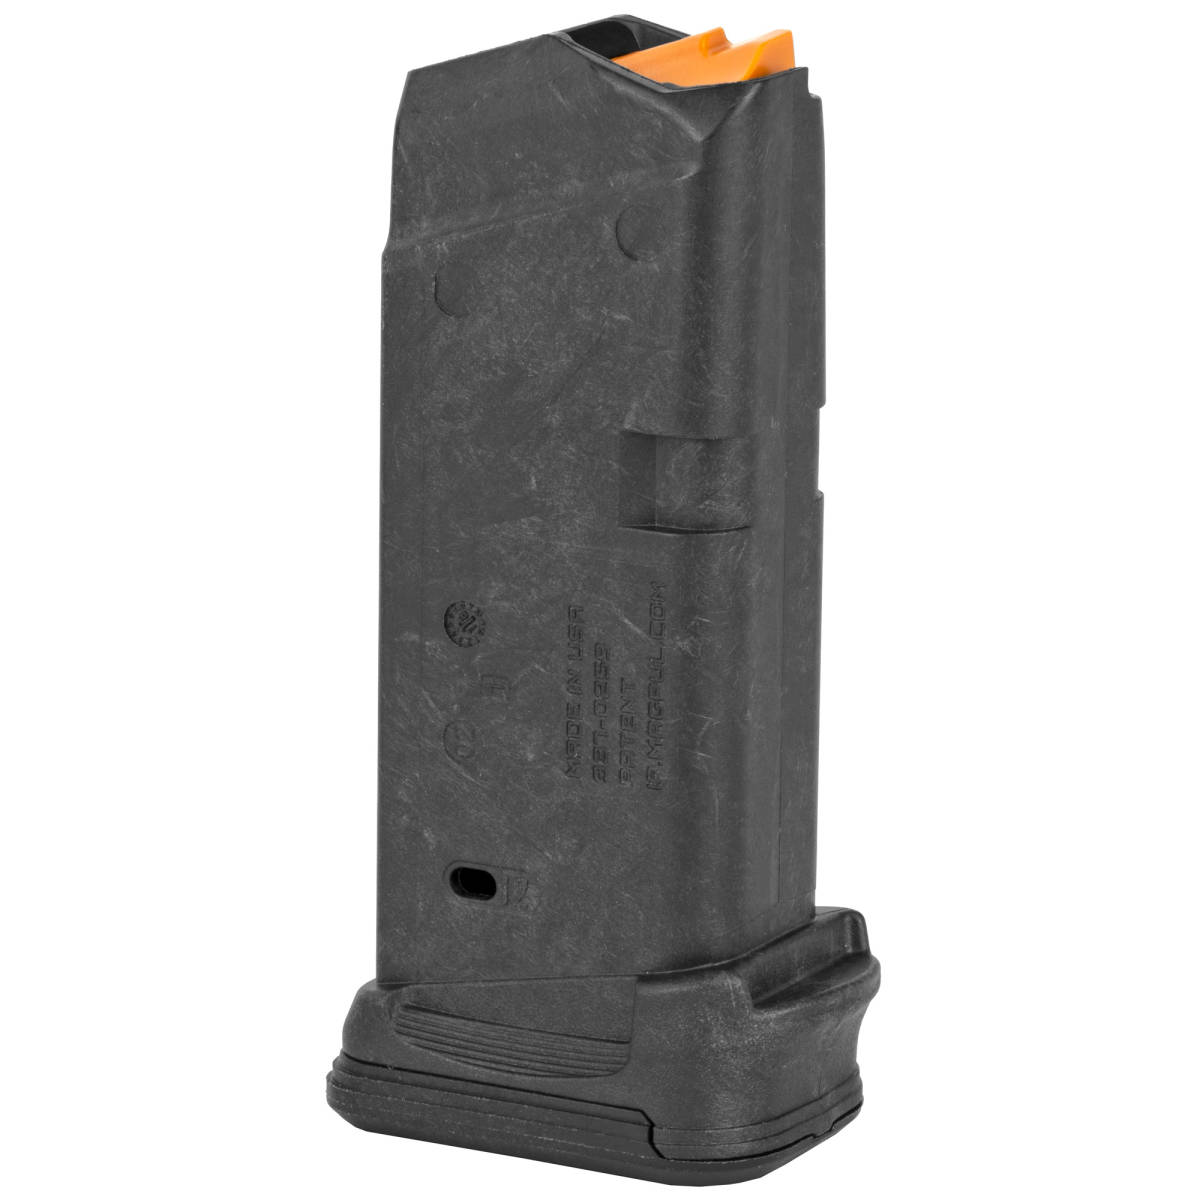 Magpul Pmag For Glock 26 12rd Magazine G26 12 Round Mag Clip 9mm-img-1